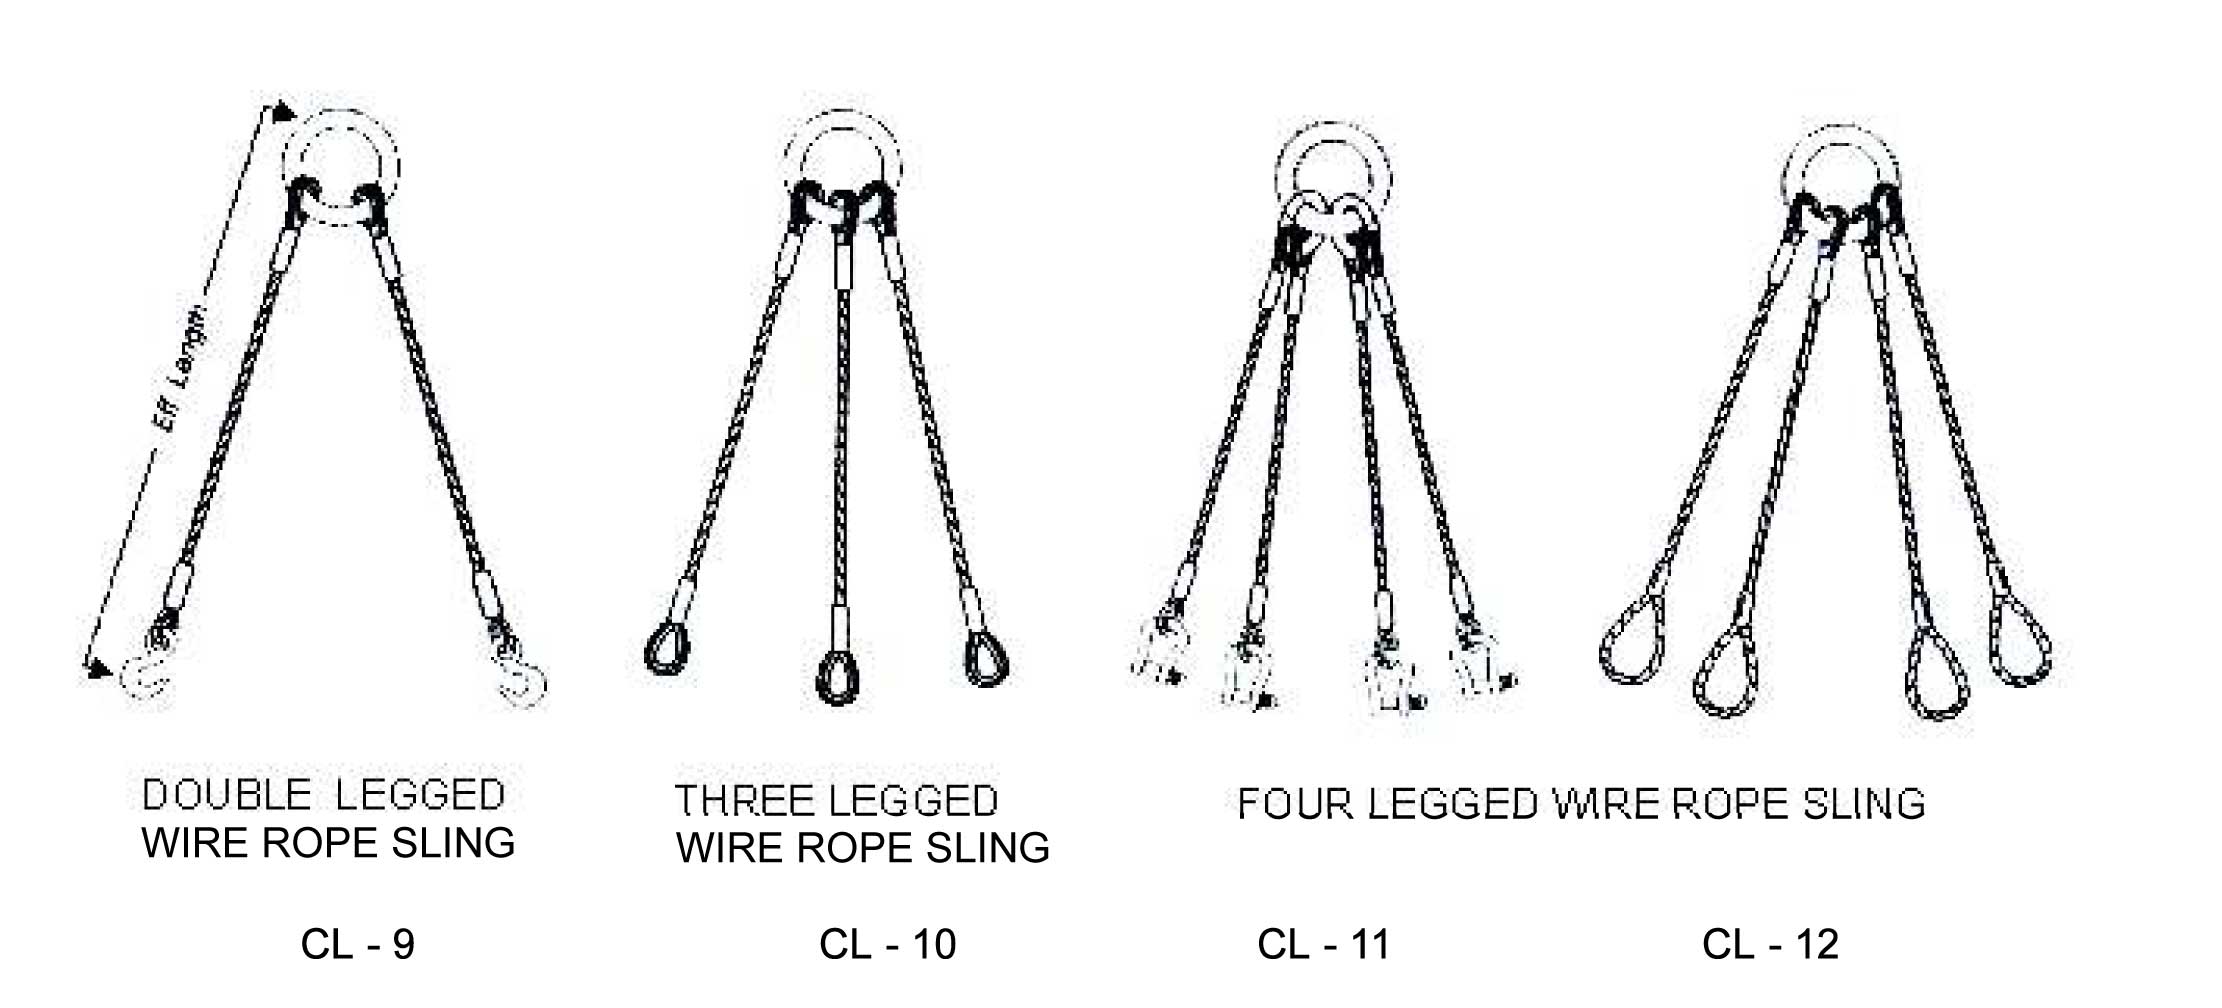 wire-ropes-wire-rope-slings